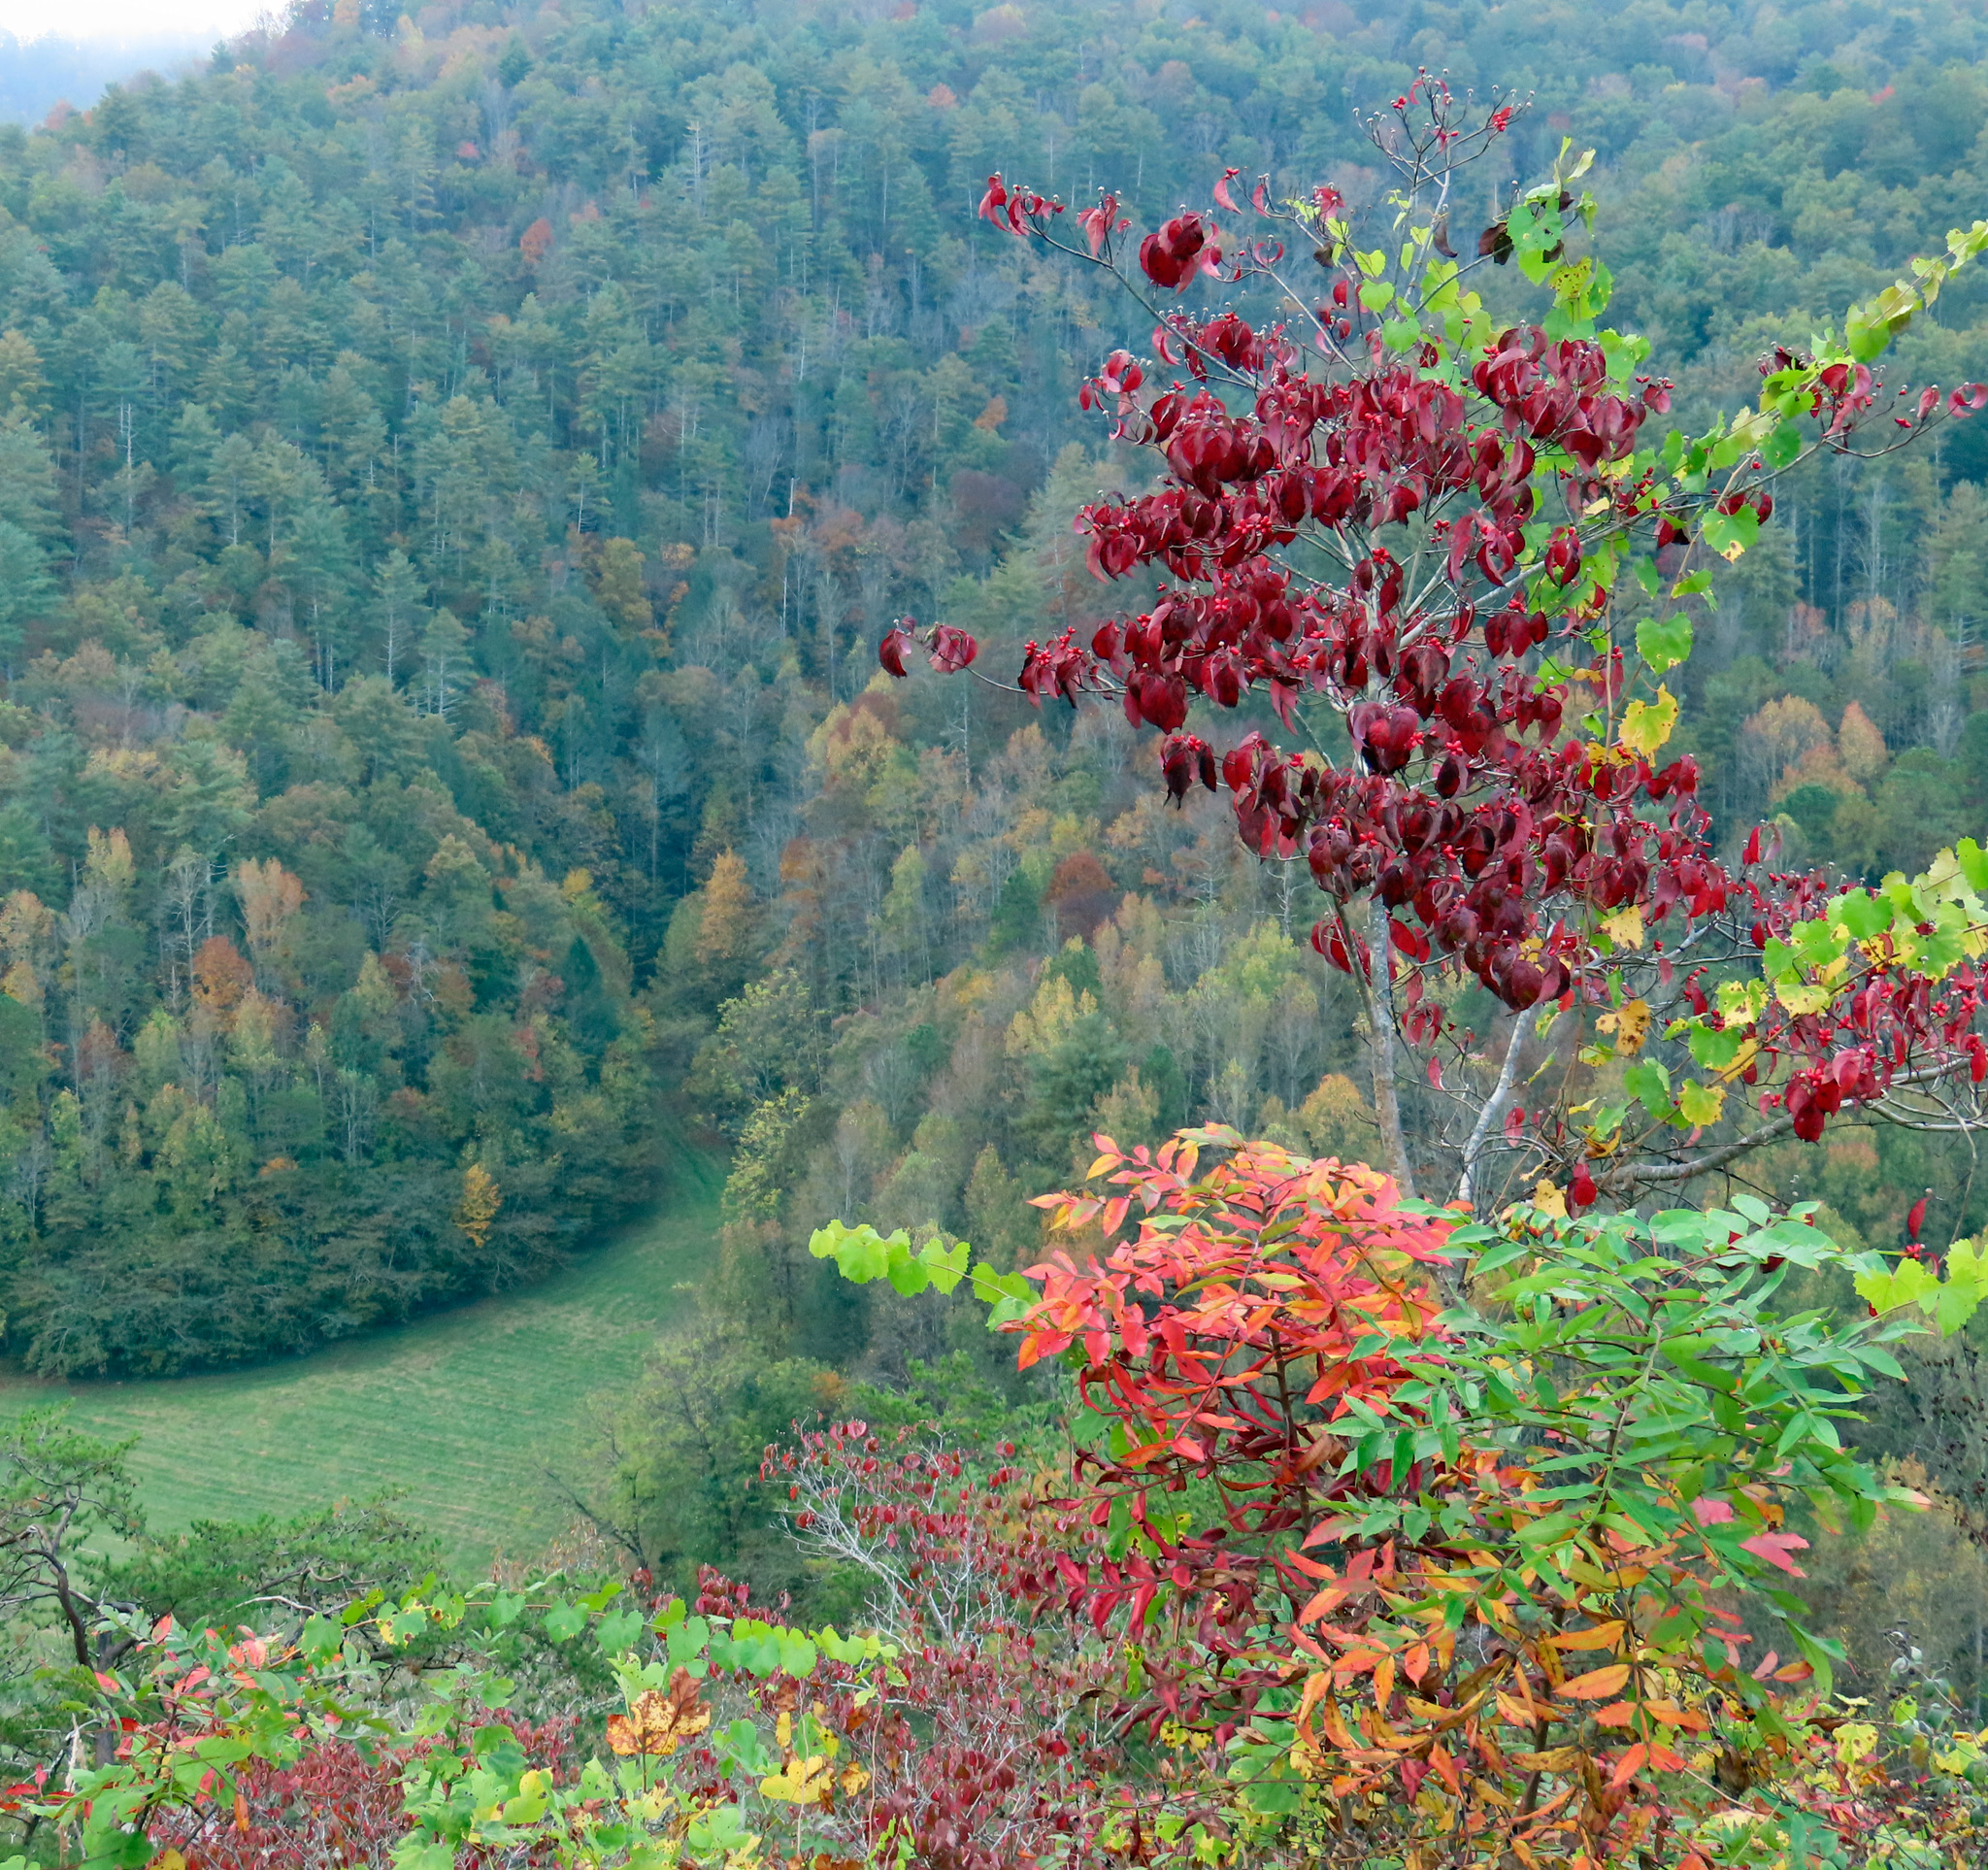 Fall is a special time in the Appalachian Mountains. Hills and valleys blush with a changing season. It’s a wonderful time to walk in the mountains, with pipe and tobacco and experience the healing nature of the natural world.